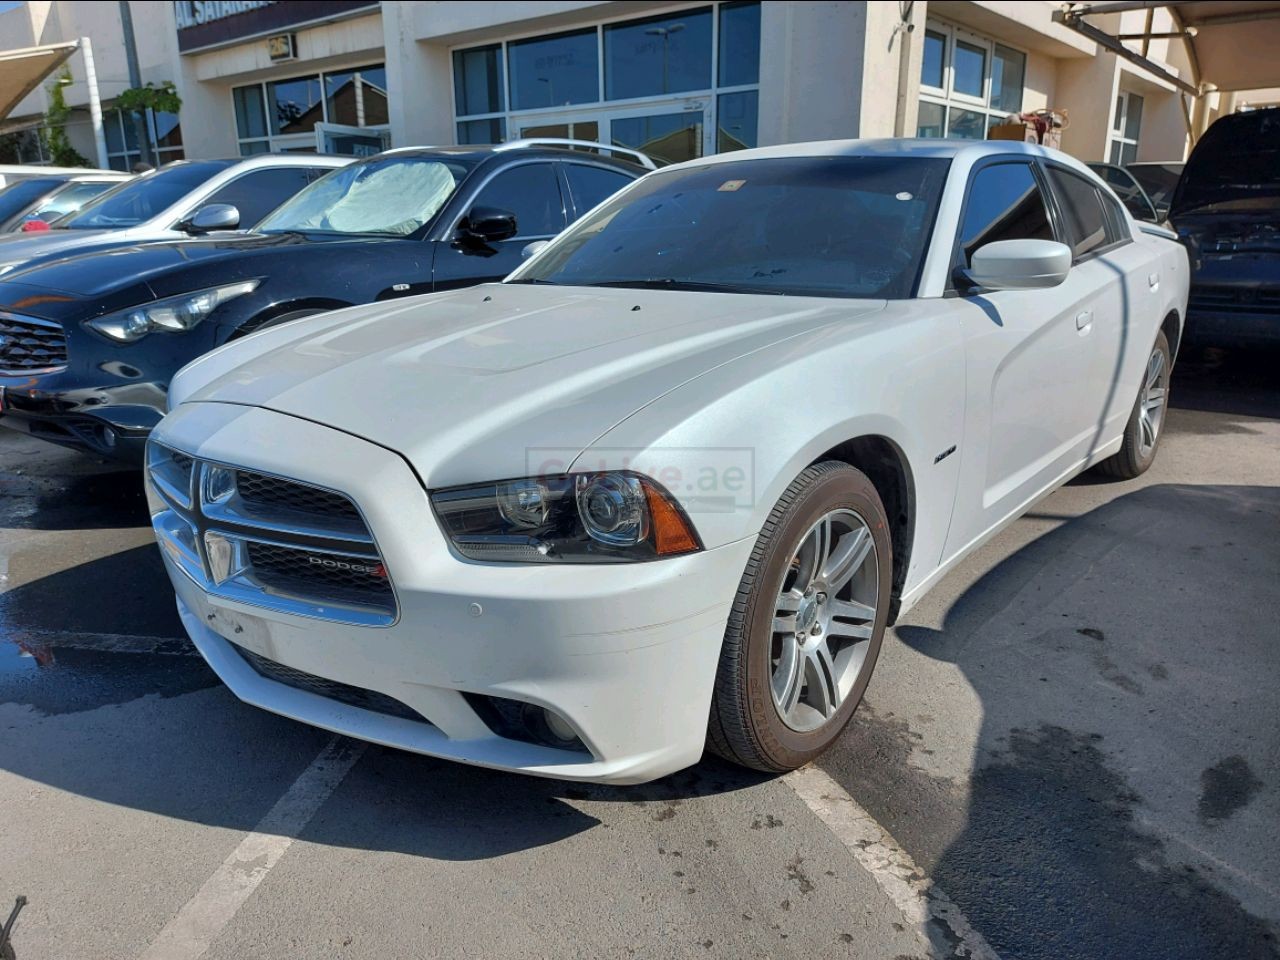 Dodge Charger 2013 for sale